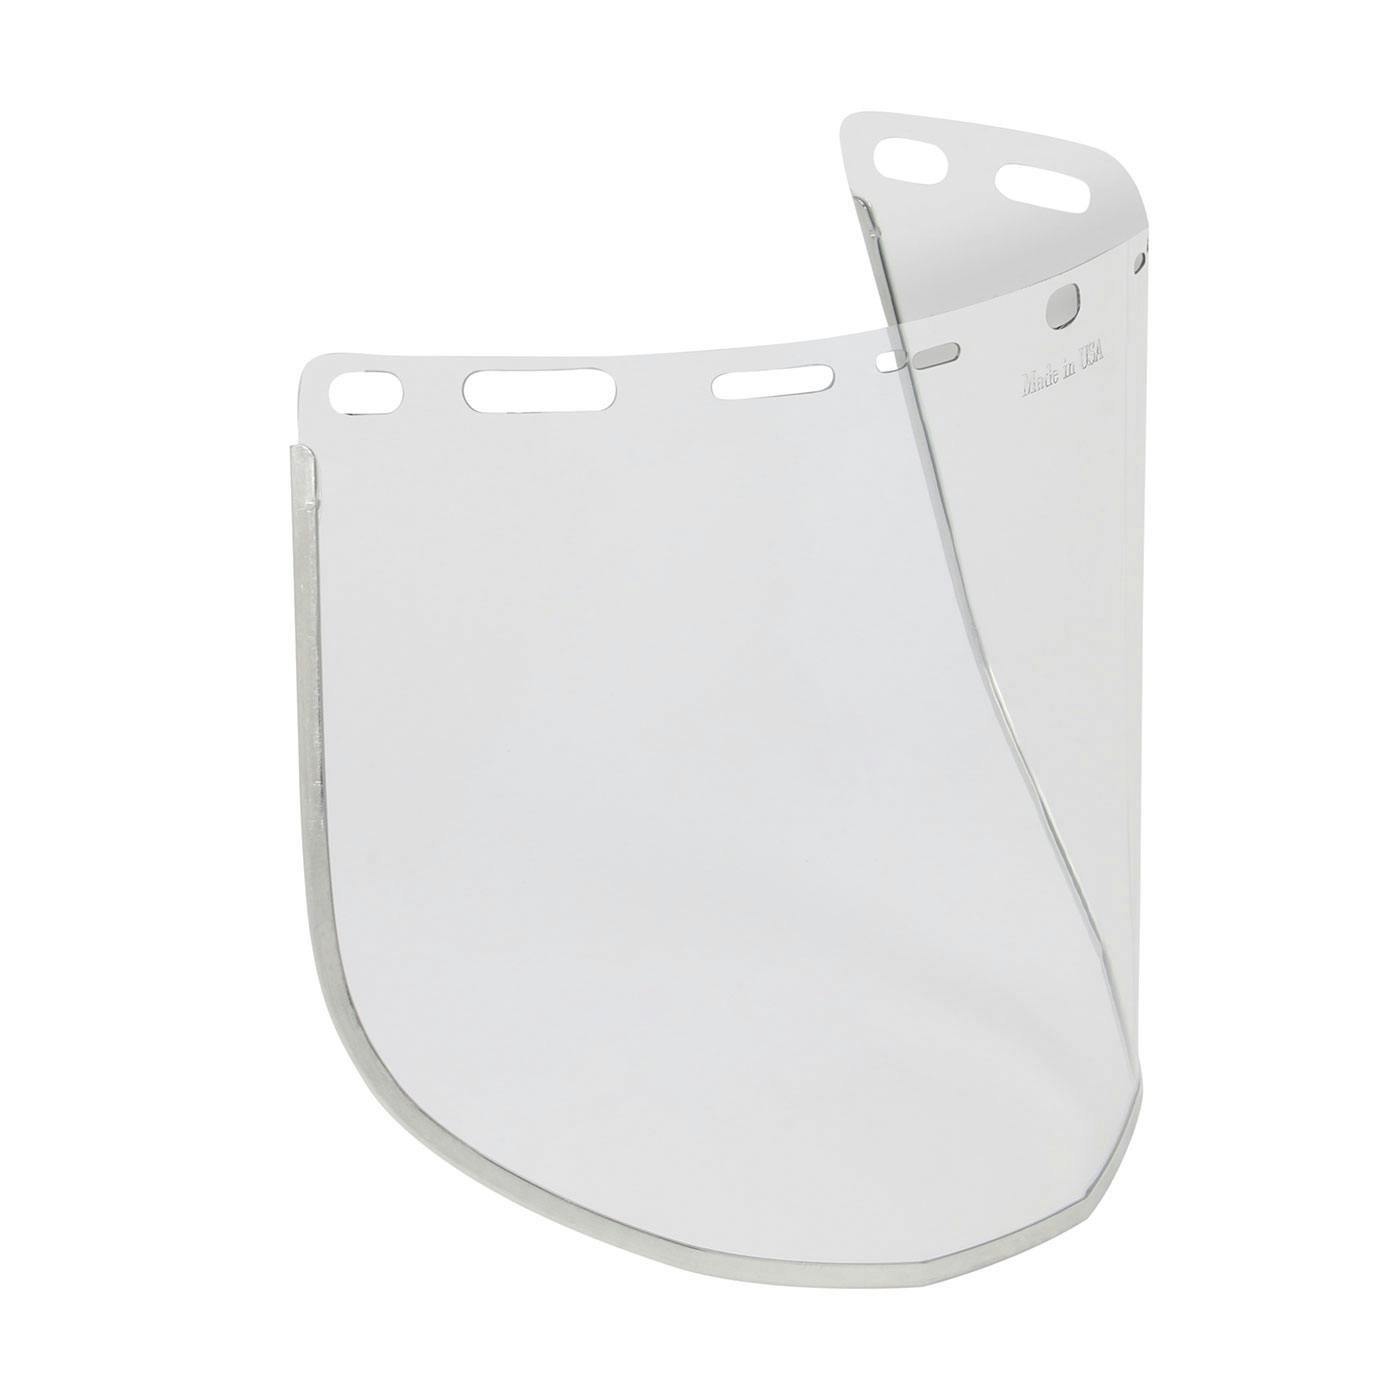 Clear Polycarbonate Safety Visor with Aluminum Binding - .040" Thickness, Clear (251-01-7204) - OS_1